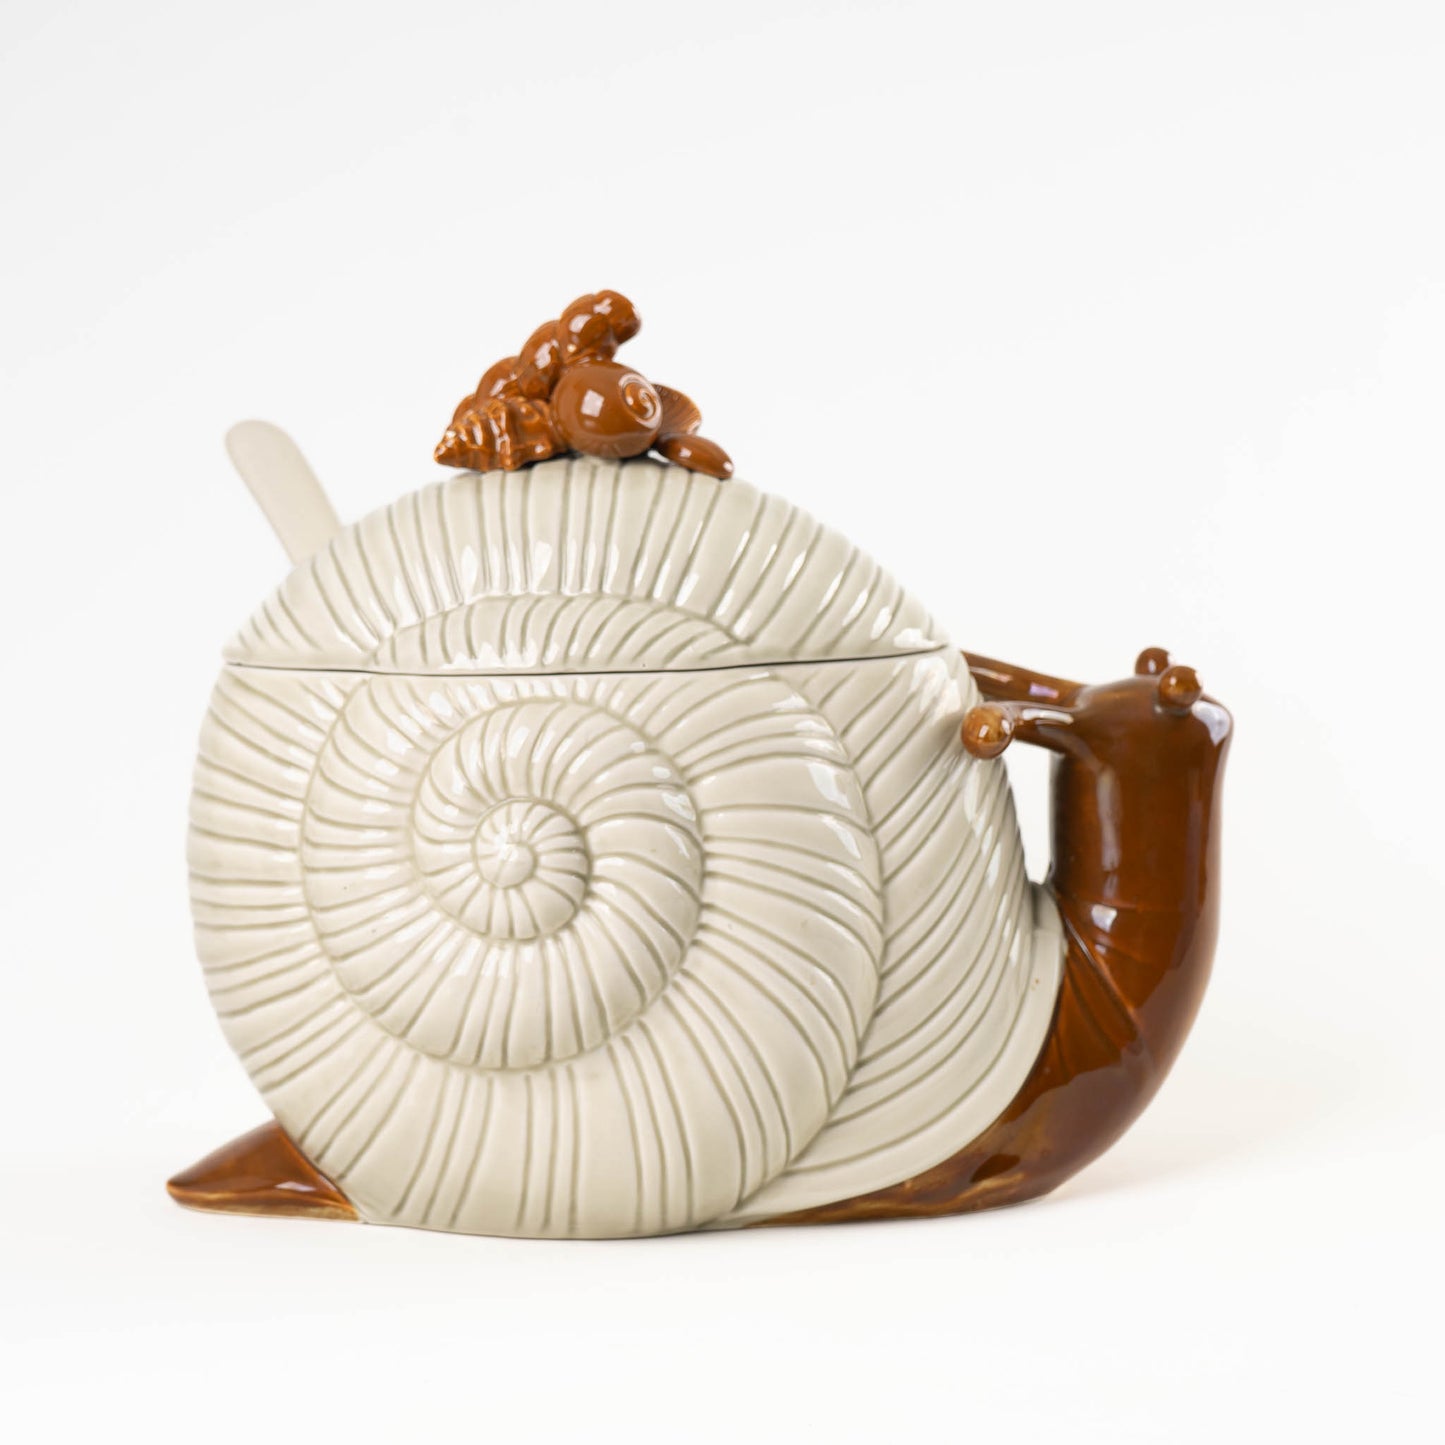 Vintage 1975 Fitz and Floyd Snail Ceramic Tureen with Ladle